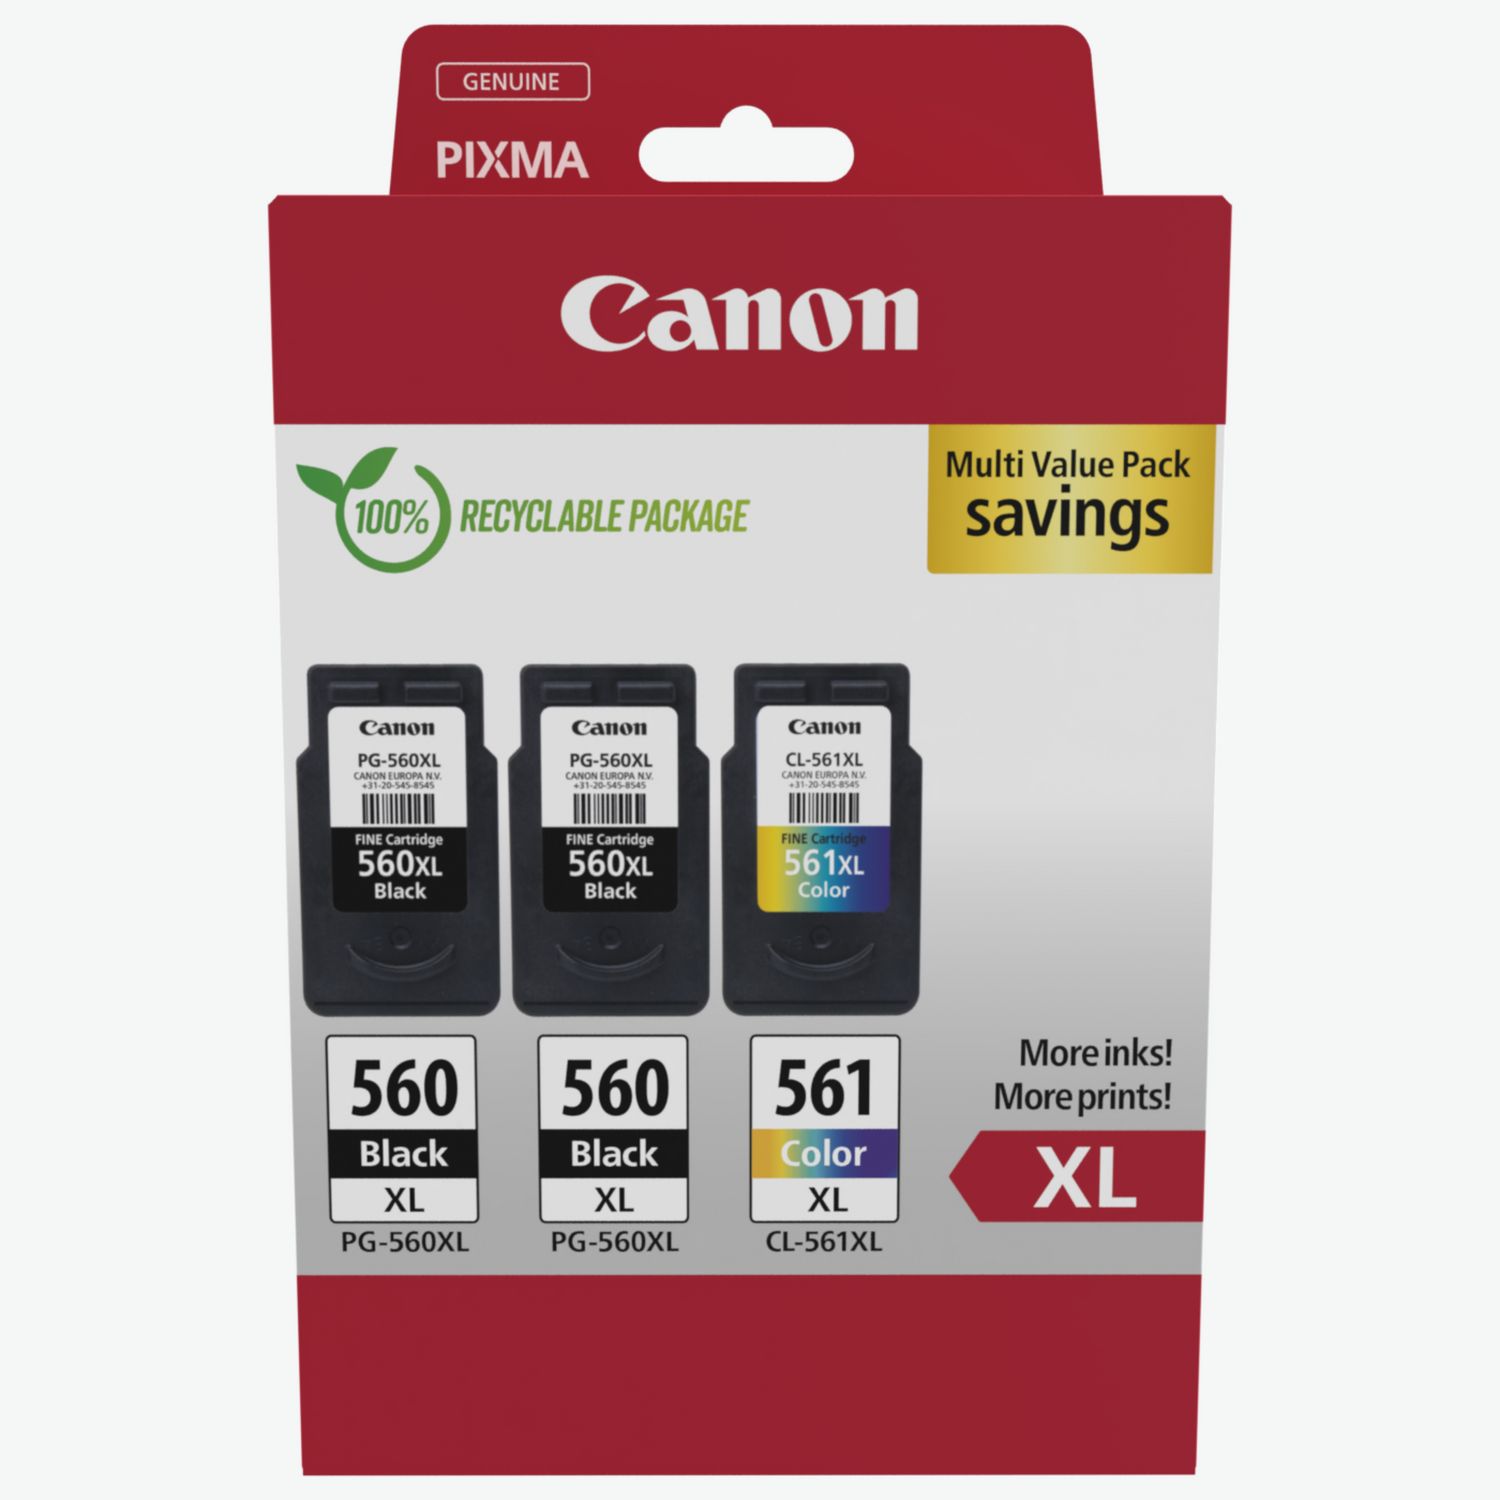 Hicor Remanufactured 560 561 Ink Cartridges Replacement for PG560 XL  CL561XL for Canon Pixma TS5351 TS5352 TS5350 TS5353